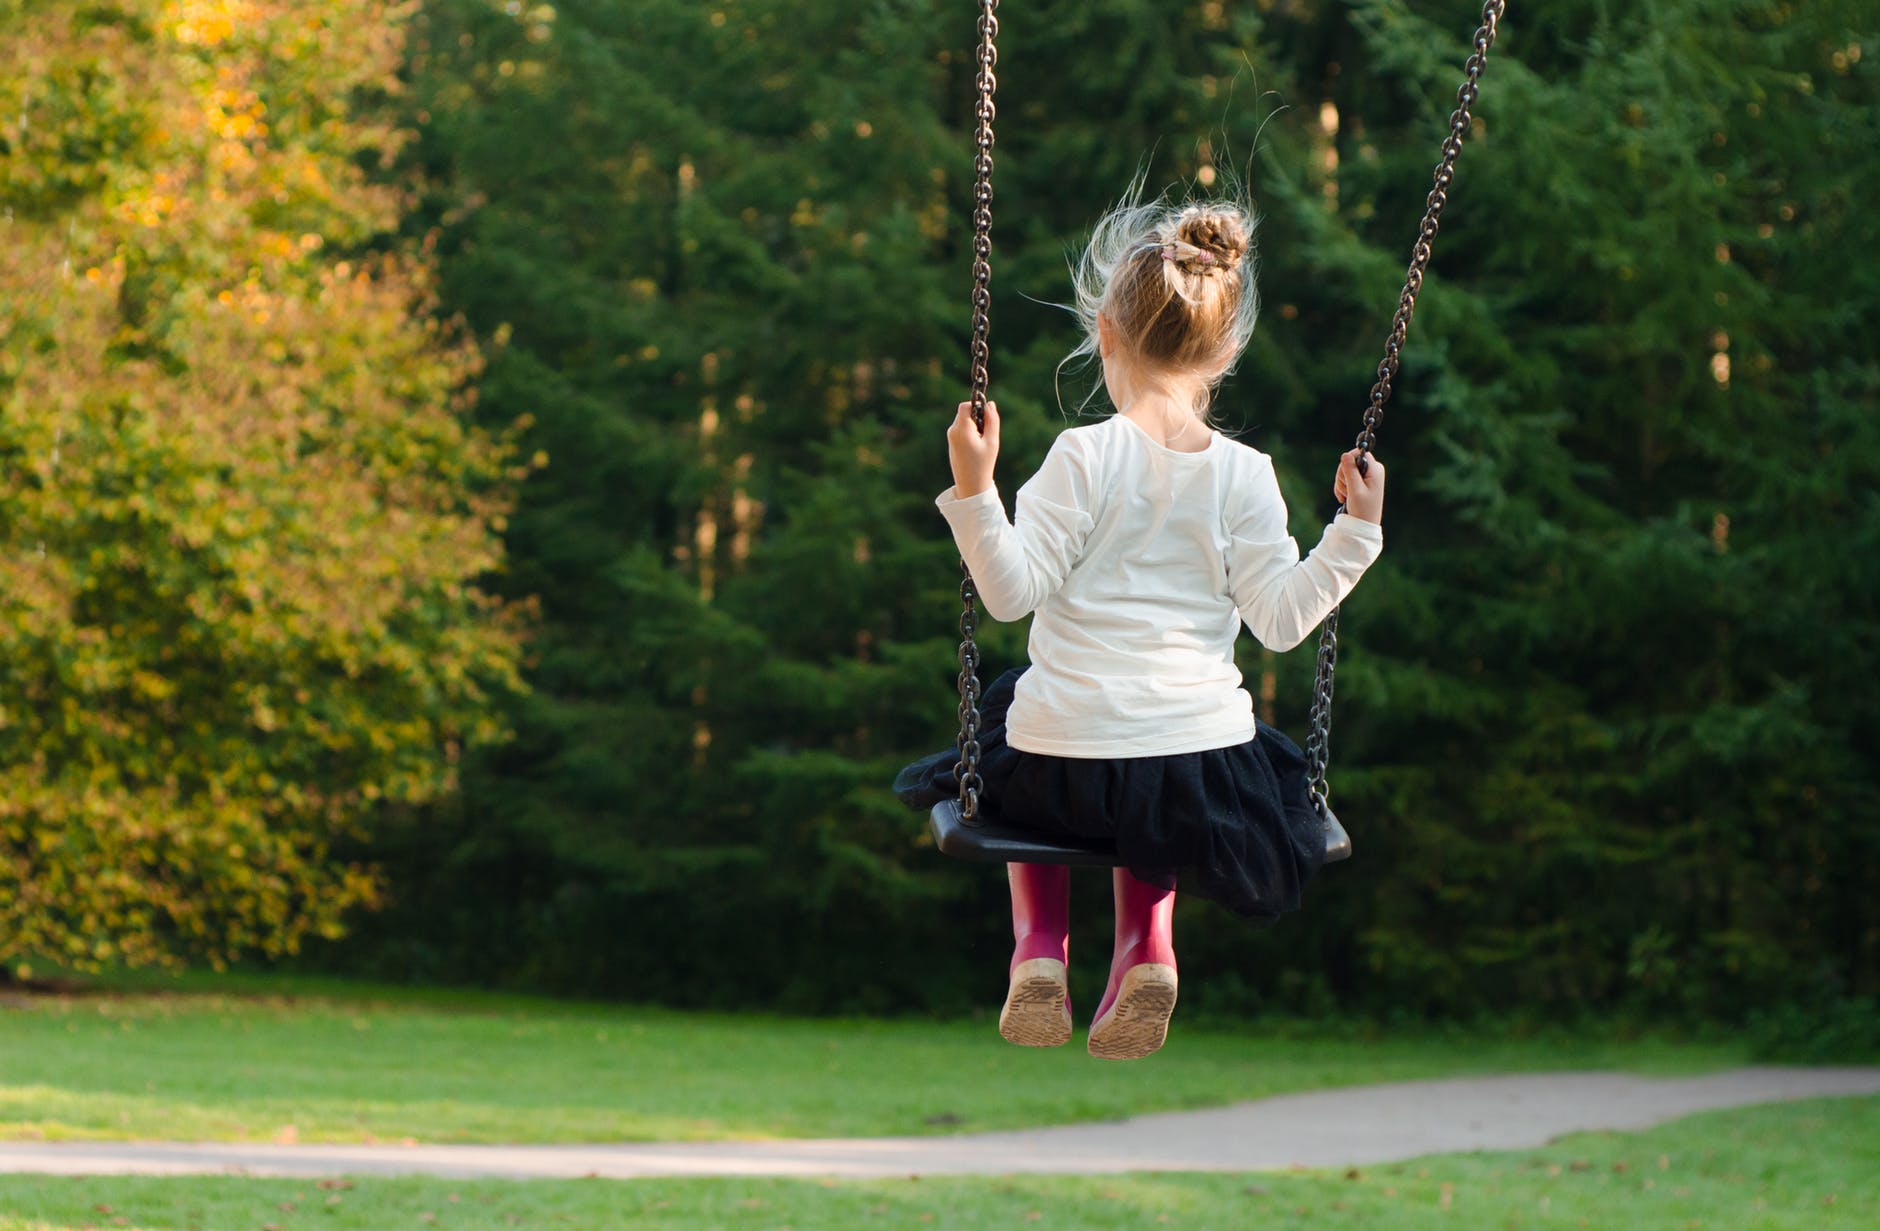 Tips To Build A Safe and Environmentally Friendly Playground In Your Backyard